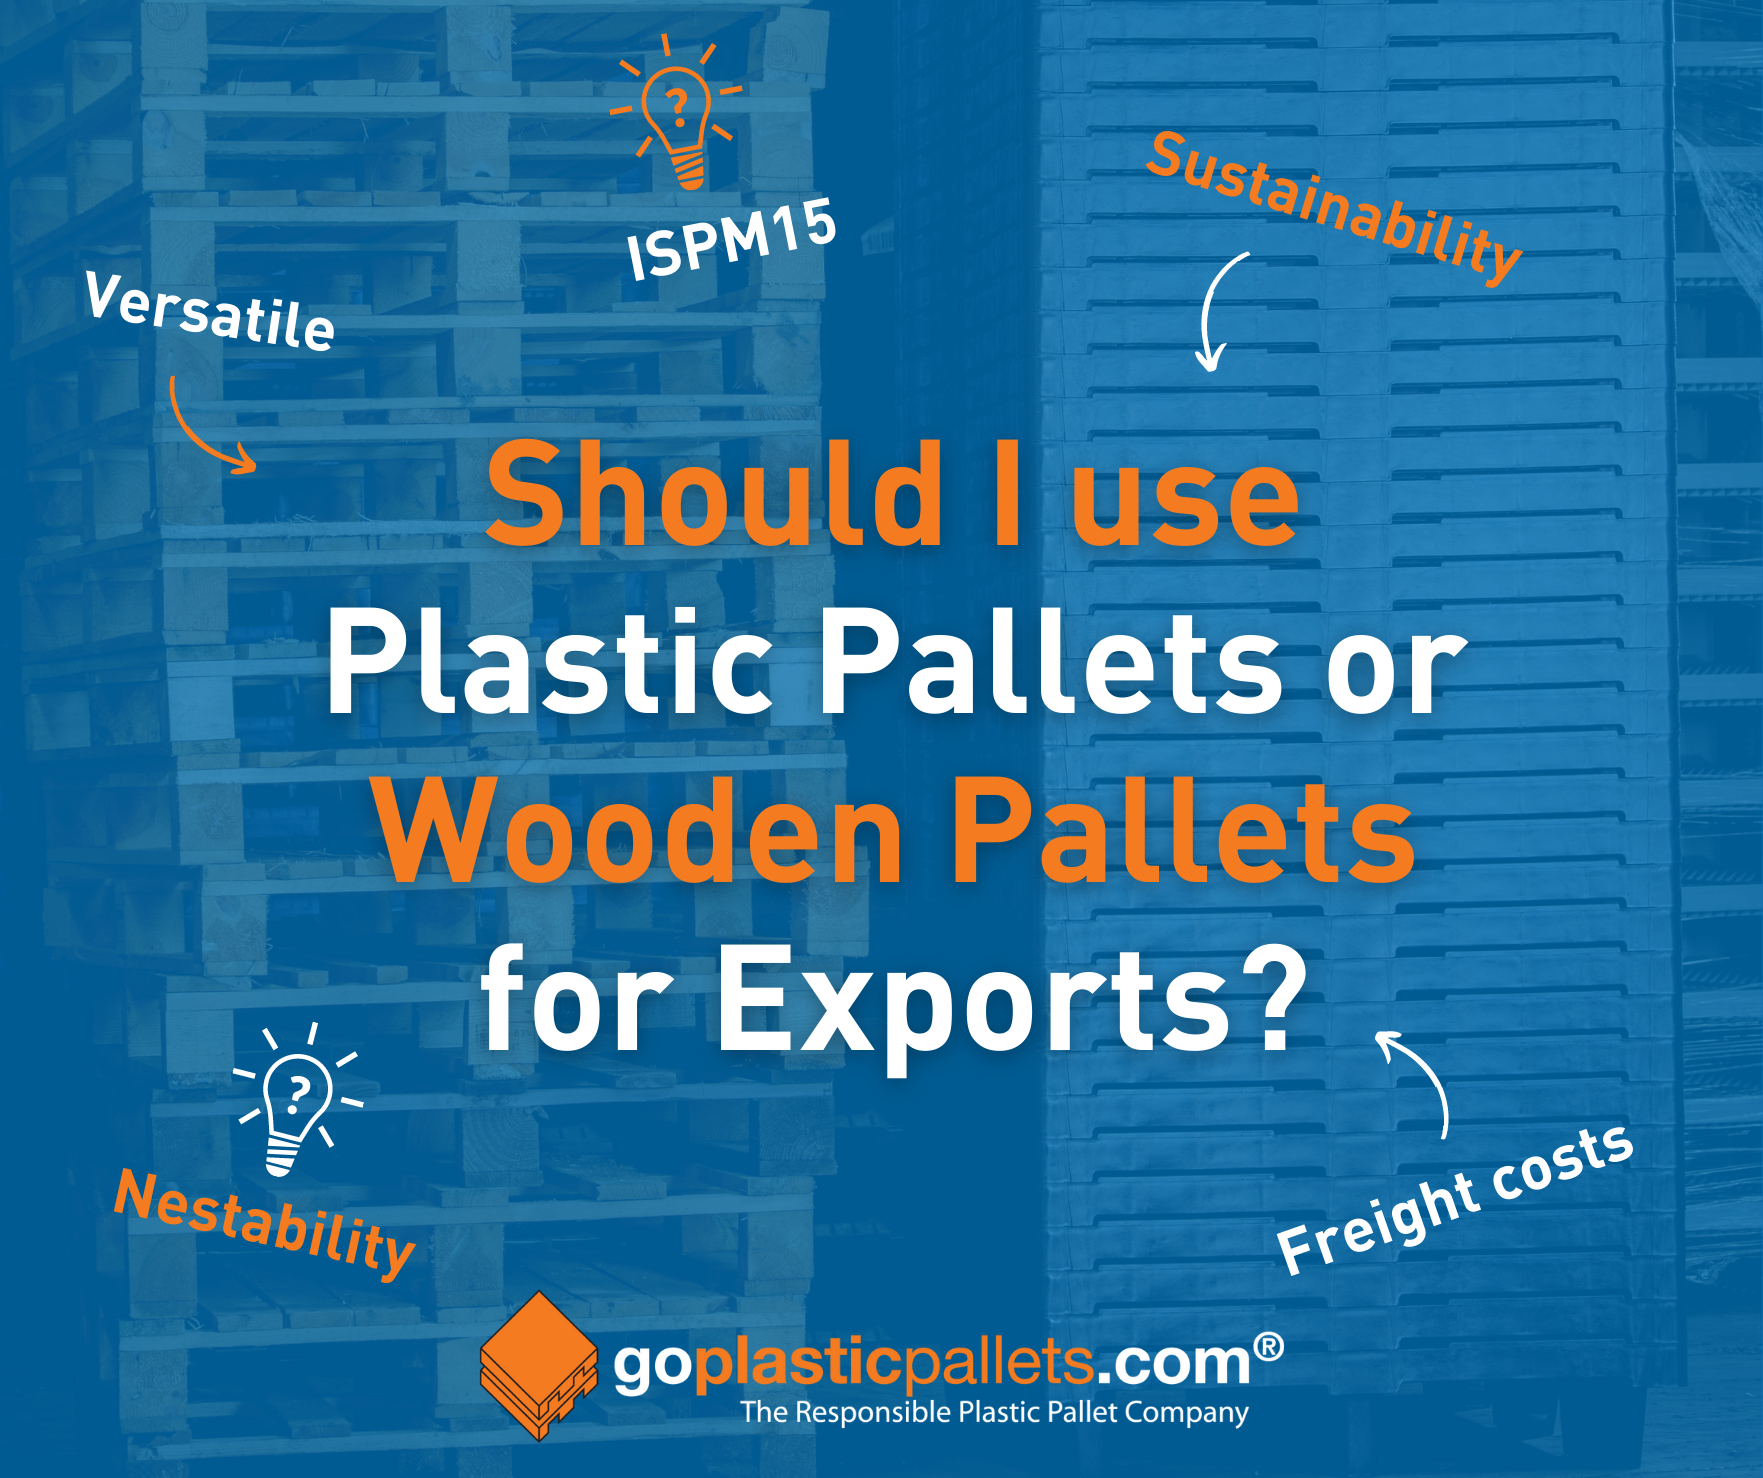 Why use plastic pallets instead of wooden pallets for exports?